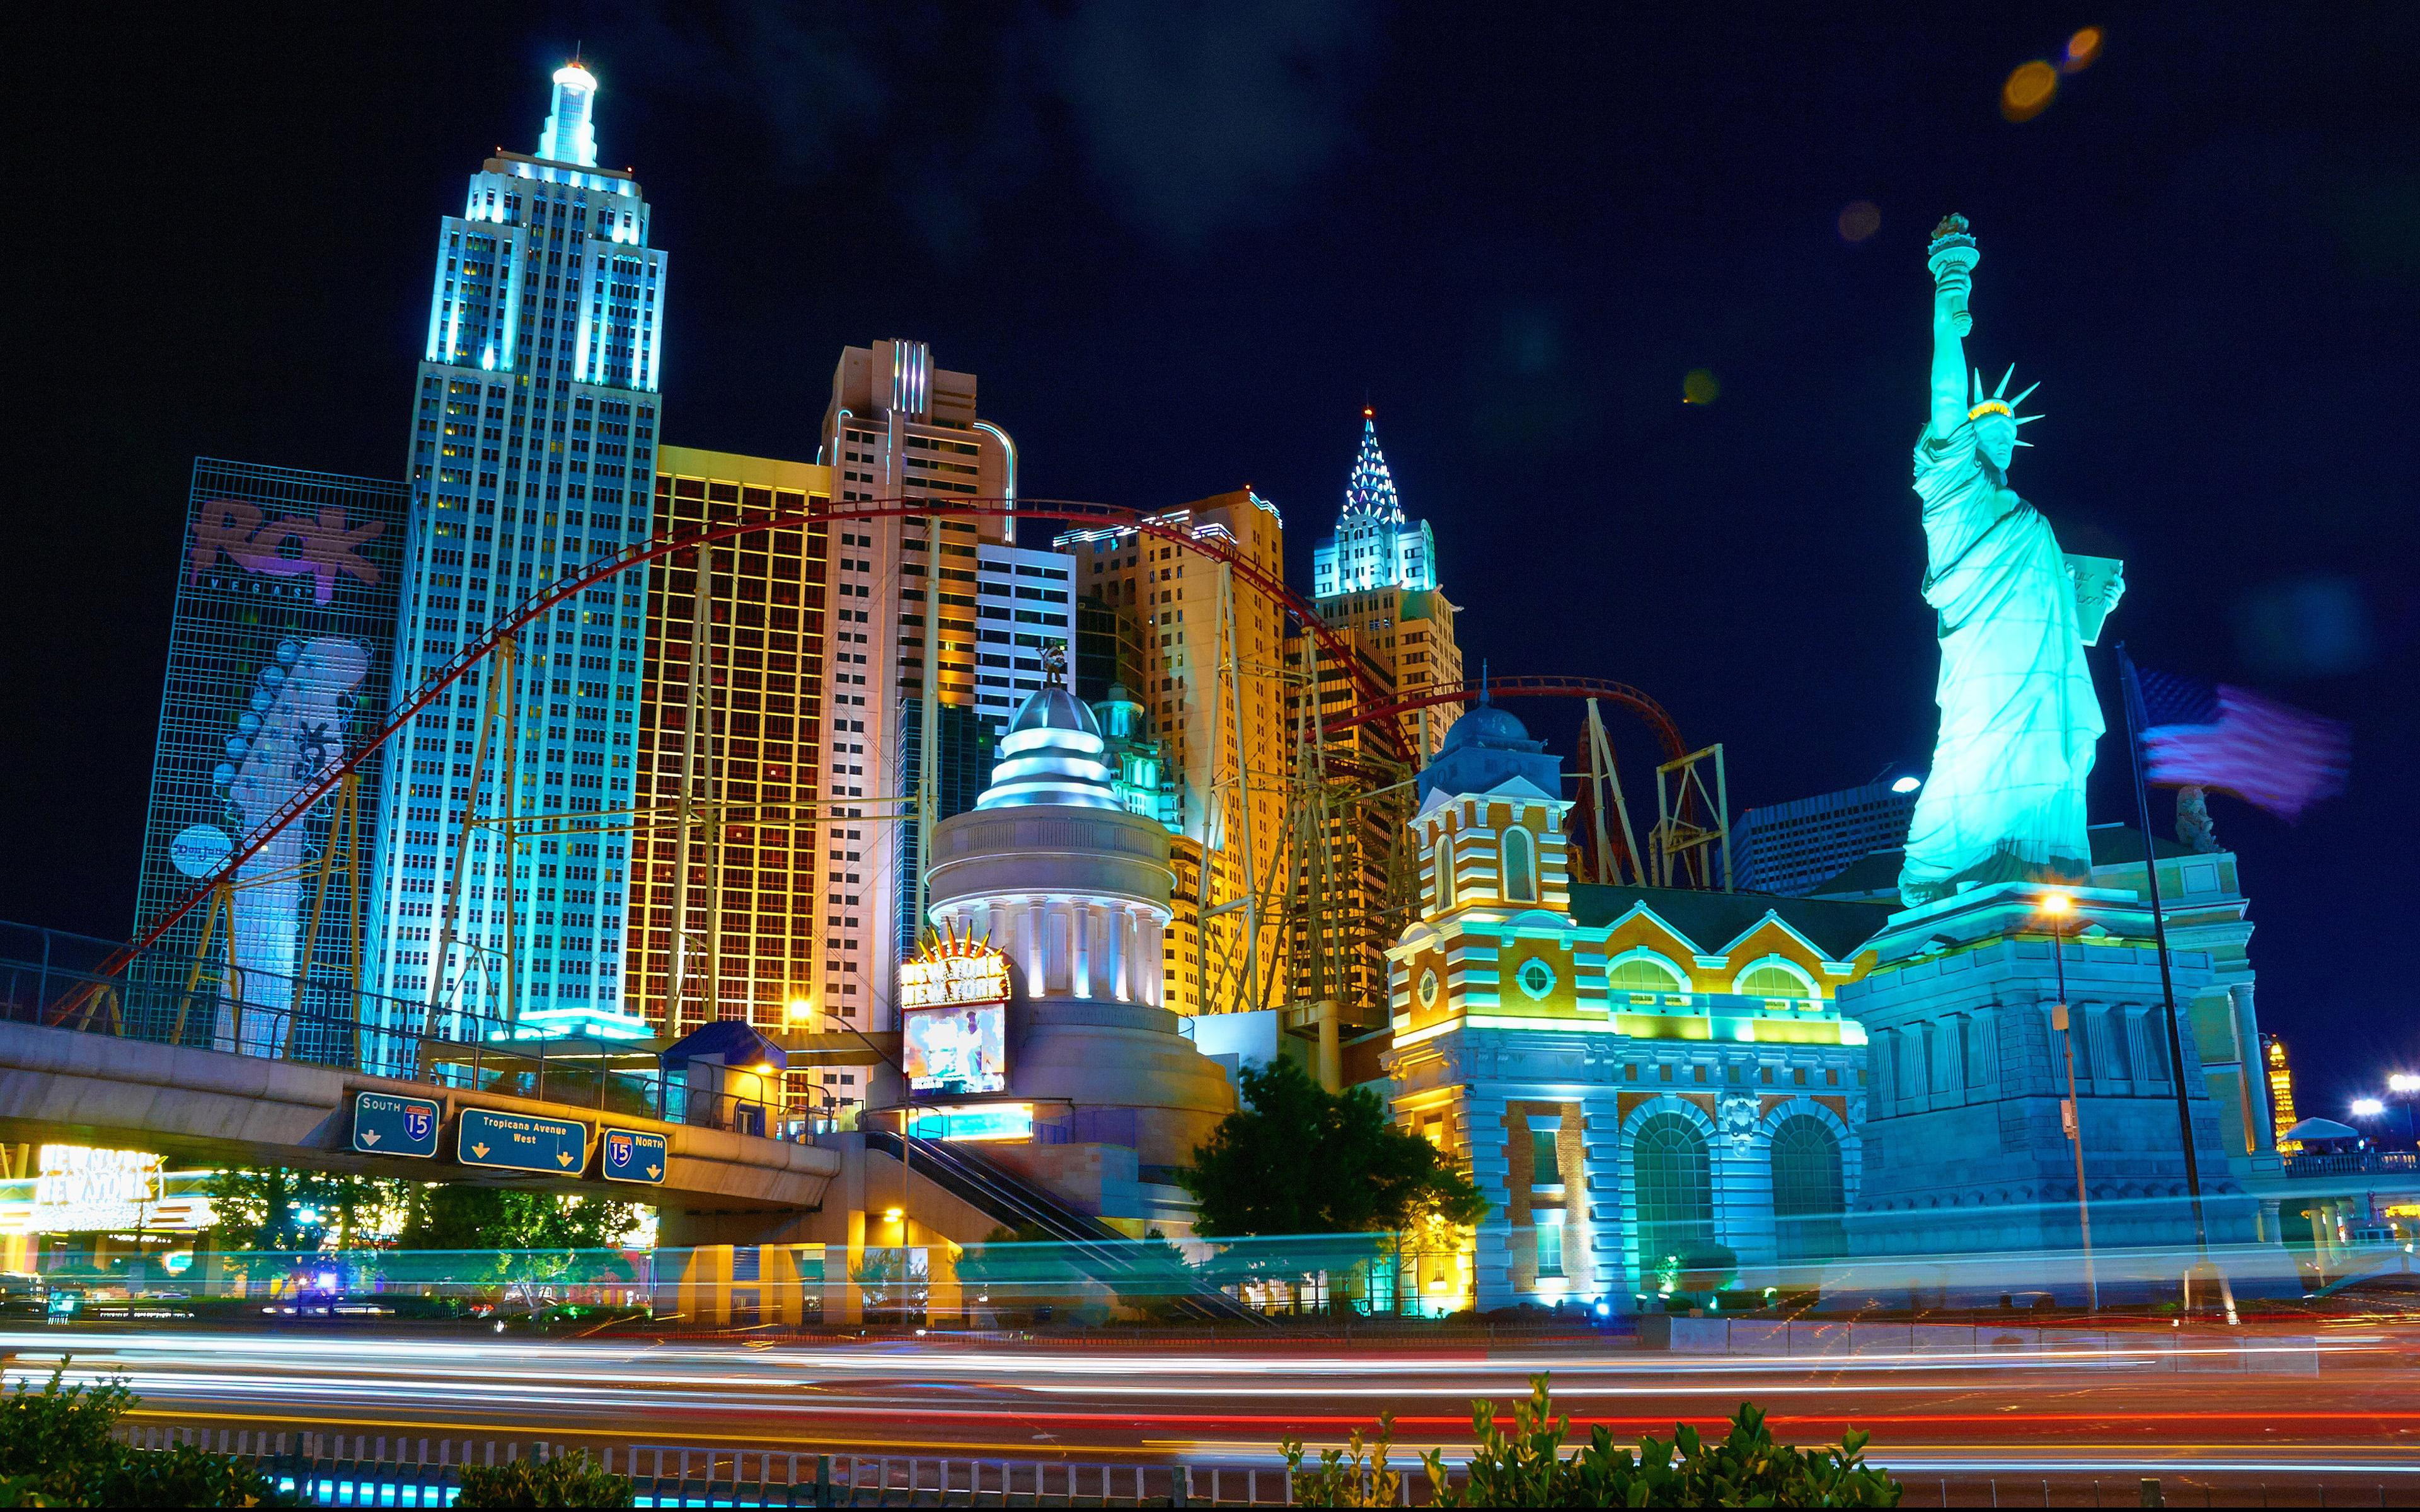 City Las Vega New York Hotel & Casino Nevada Usa Hd Wallpapers For Mobile Phones And Pc 38400×2400